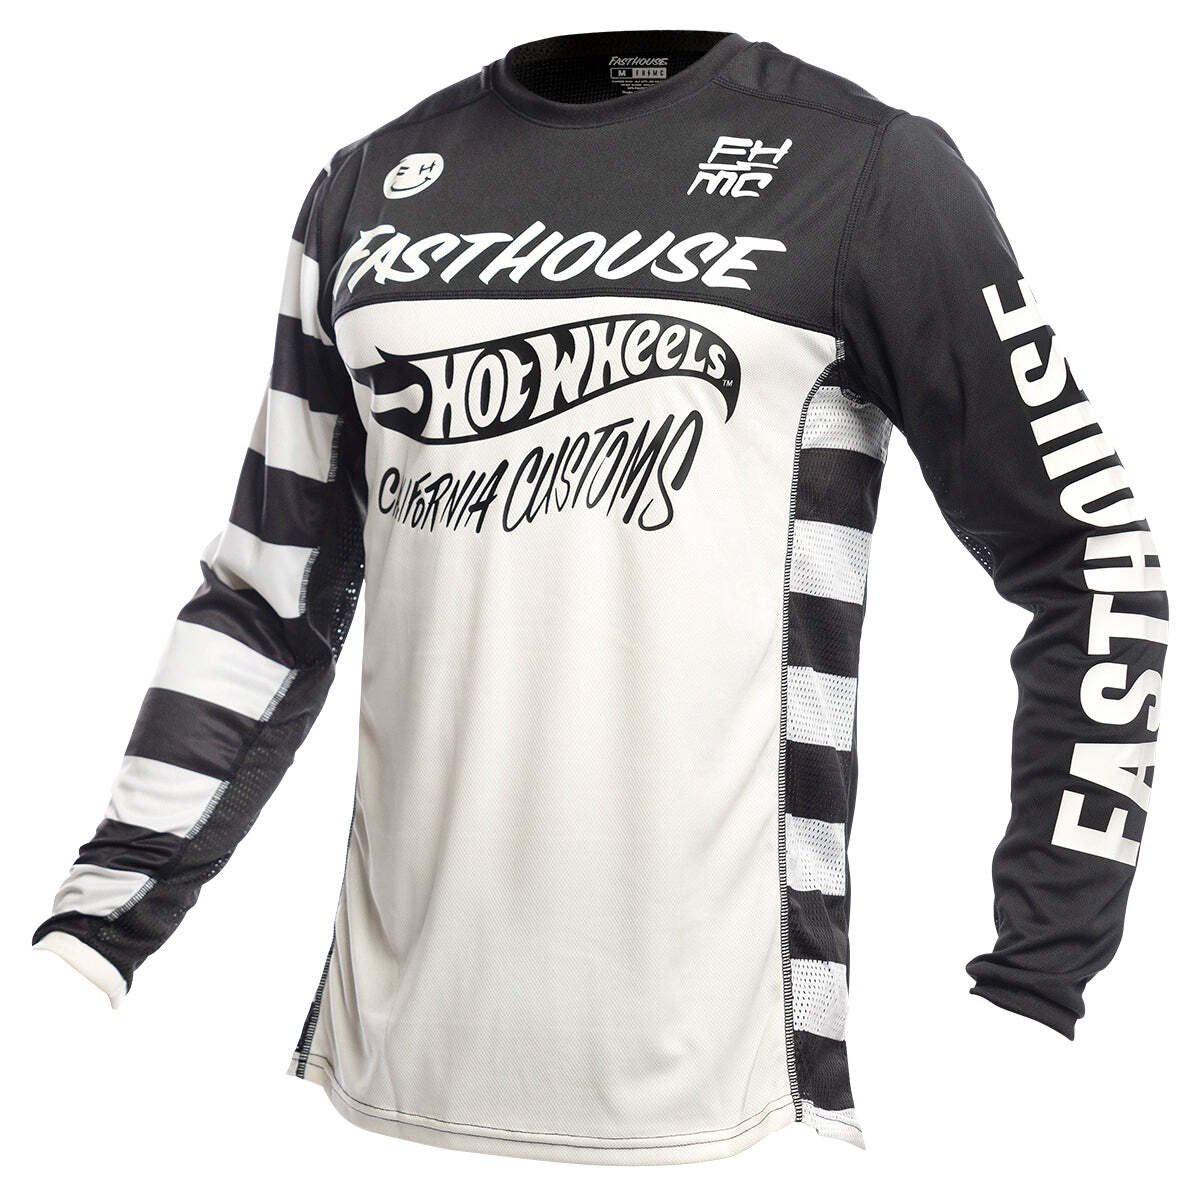 Fasthouse Grindhouse Hot Wheels Jersey - Black/White - FASTHOUSE